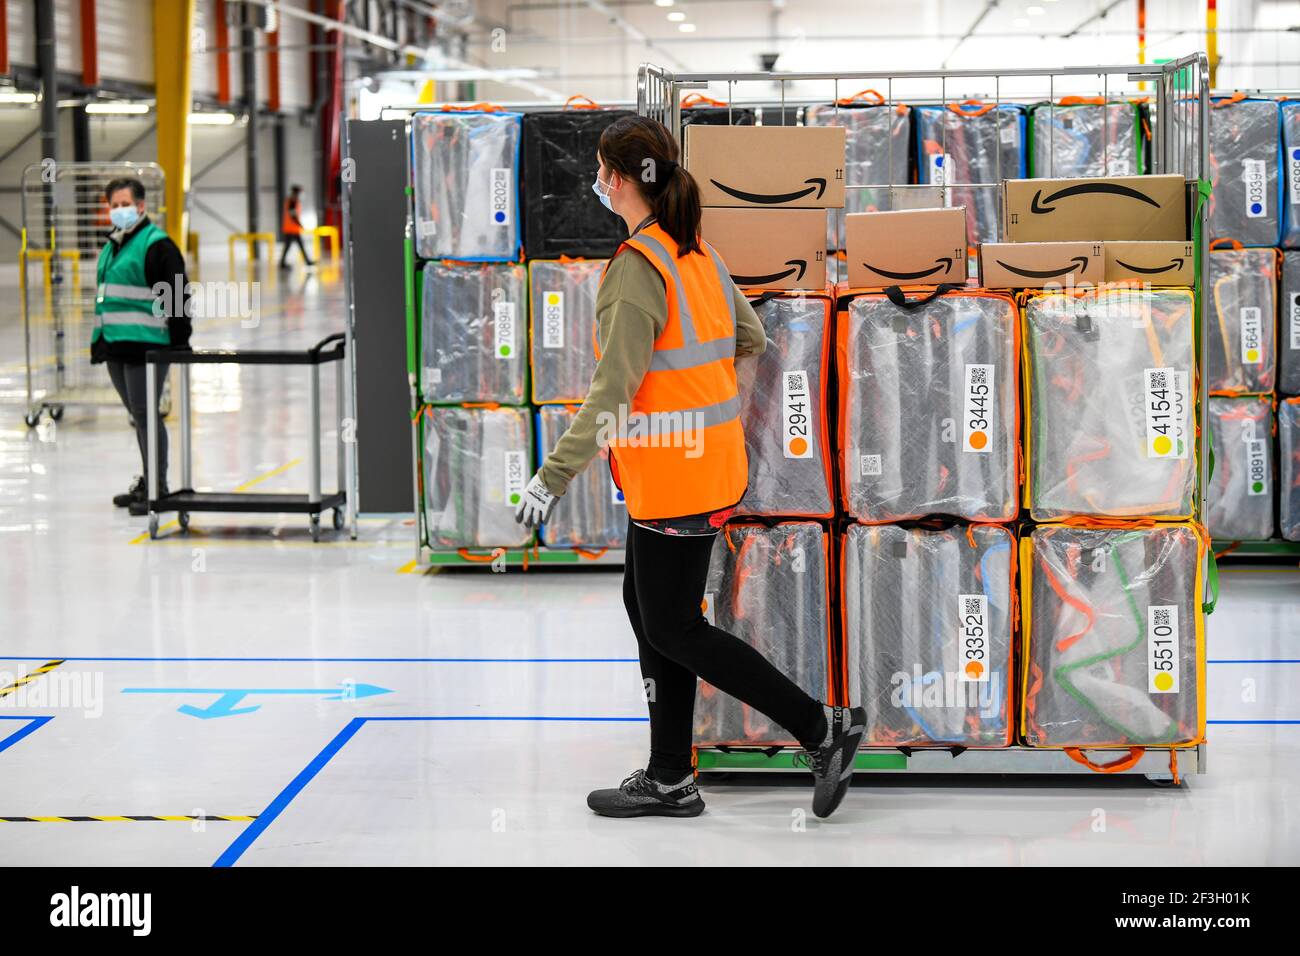 Amazon fulfillment center in Saint-Etienne-du-Rouvray (Normandy, northern France) Stock Photo